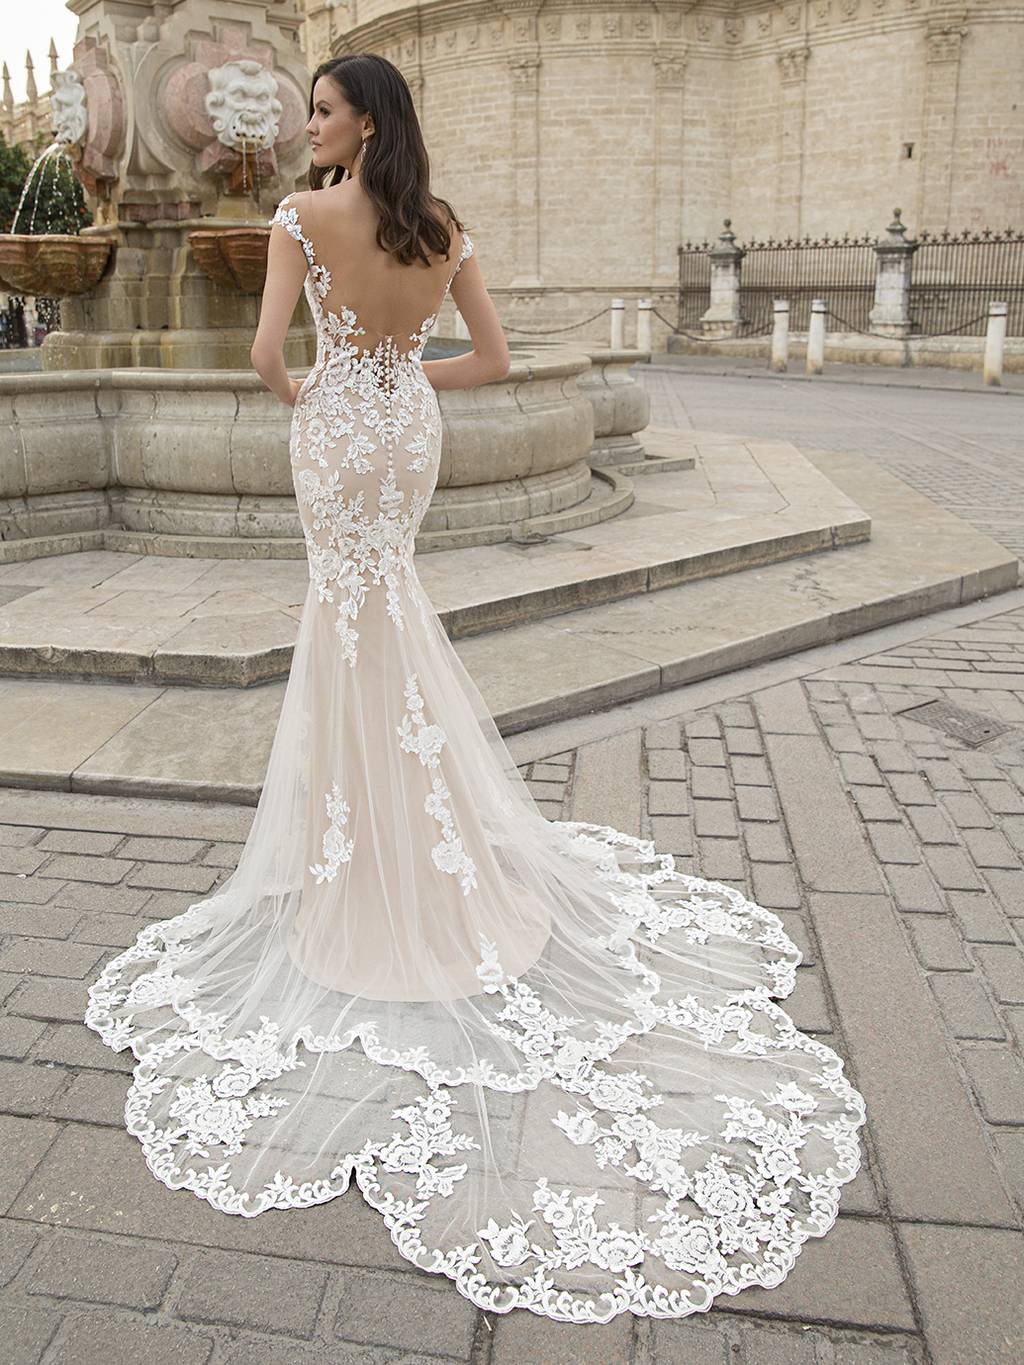 All Who Wander Wedding Dresses | The Bridal Collection in Denver